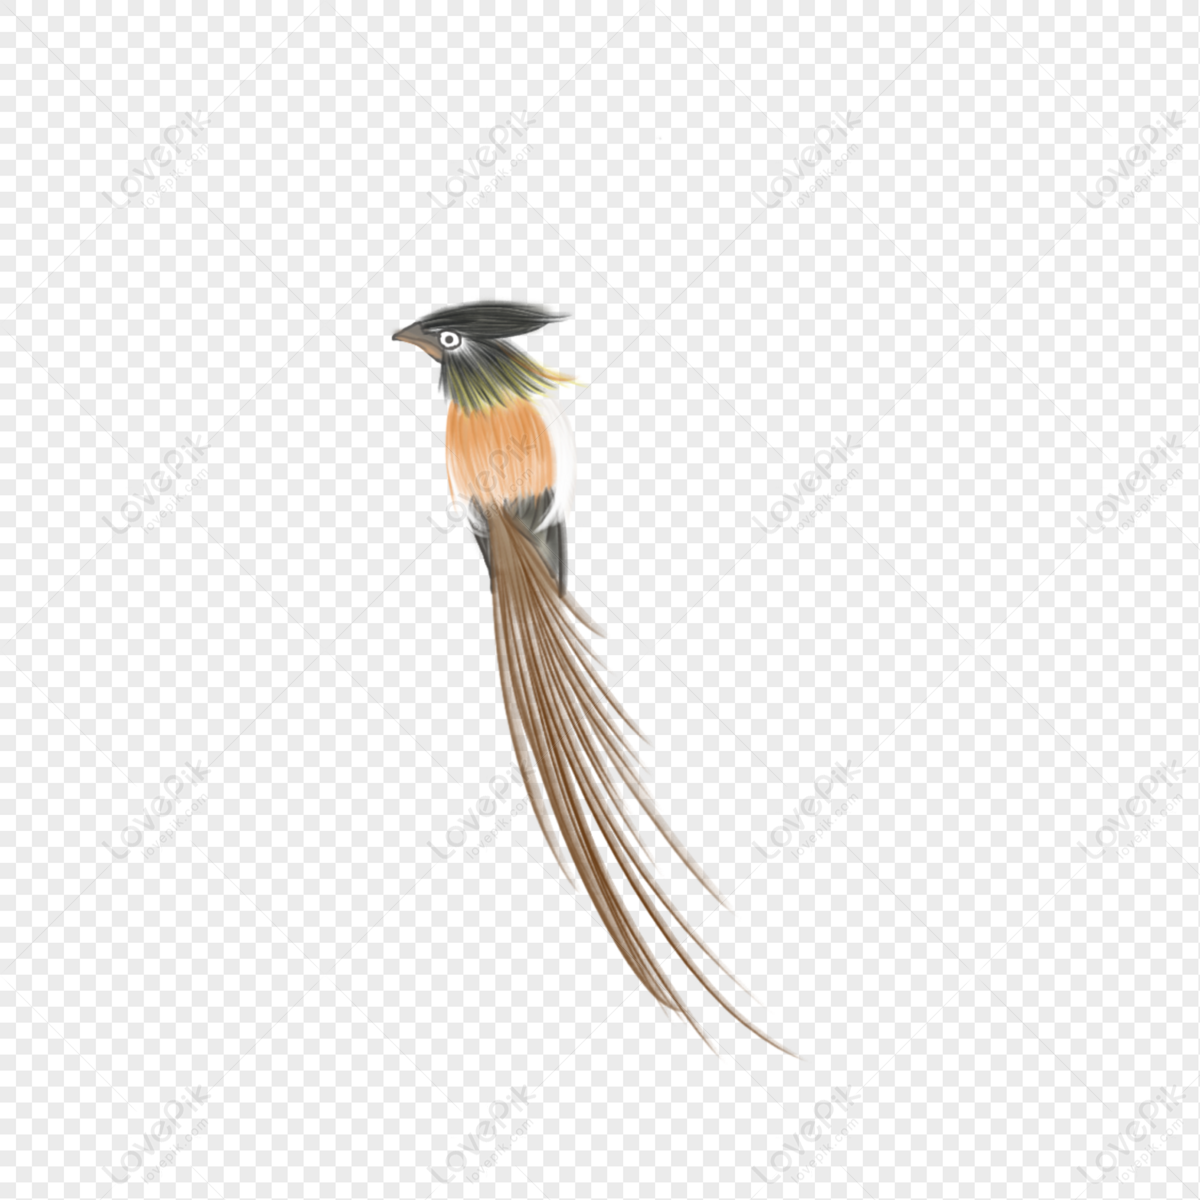 Bird PNG Transparent Image And Clipart Image For Free Download ...